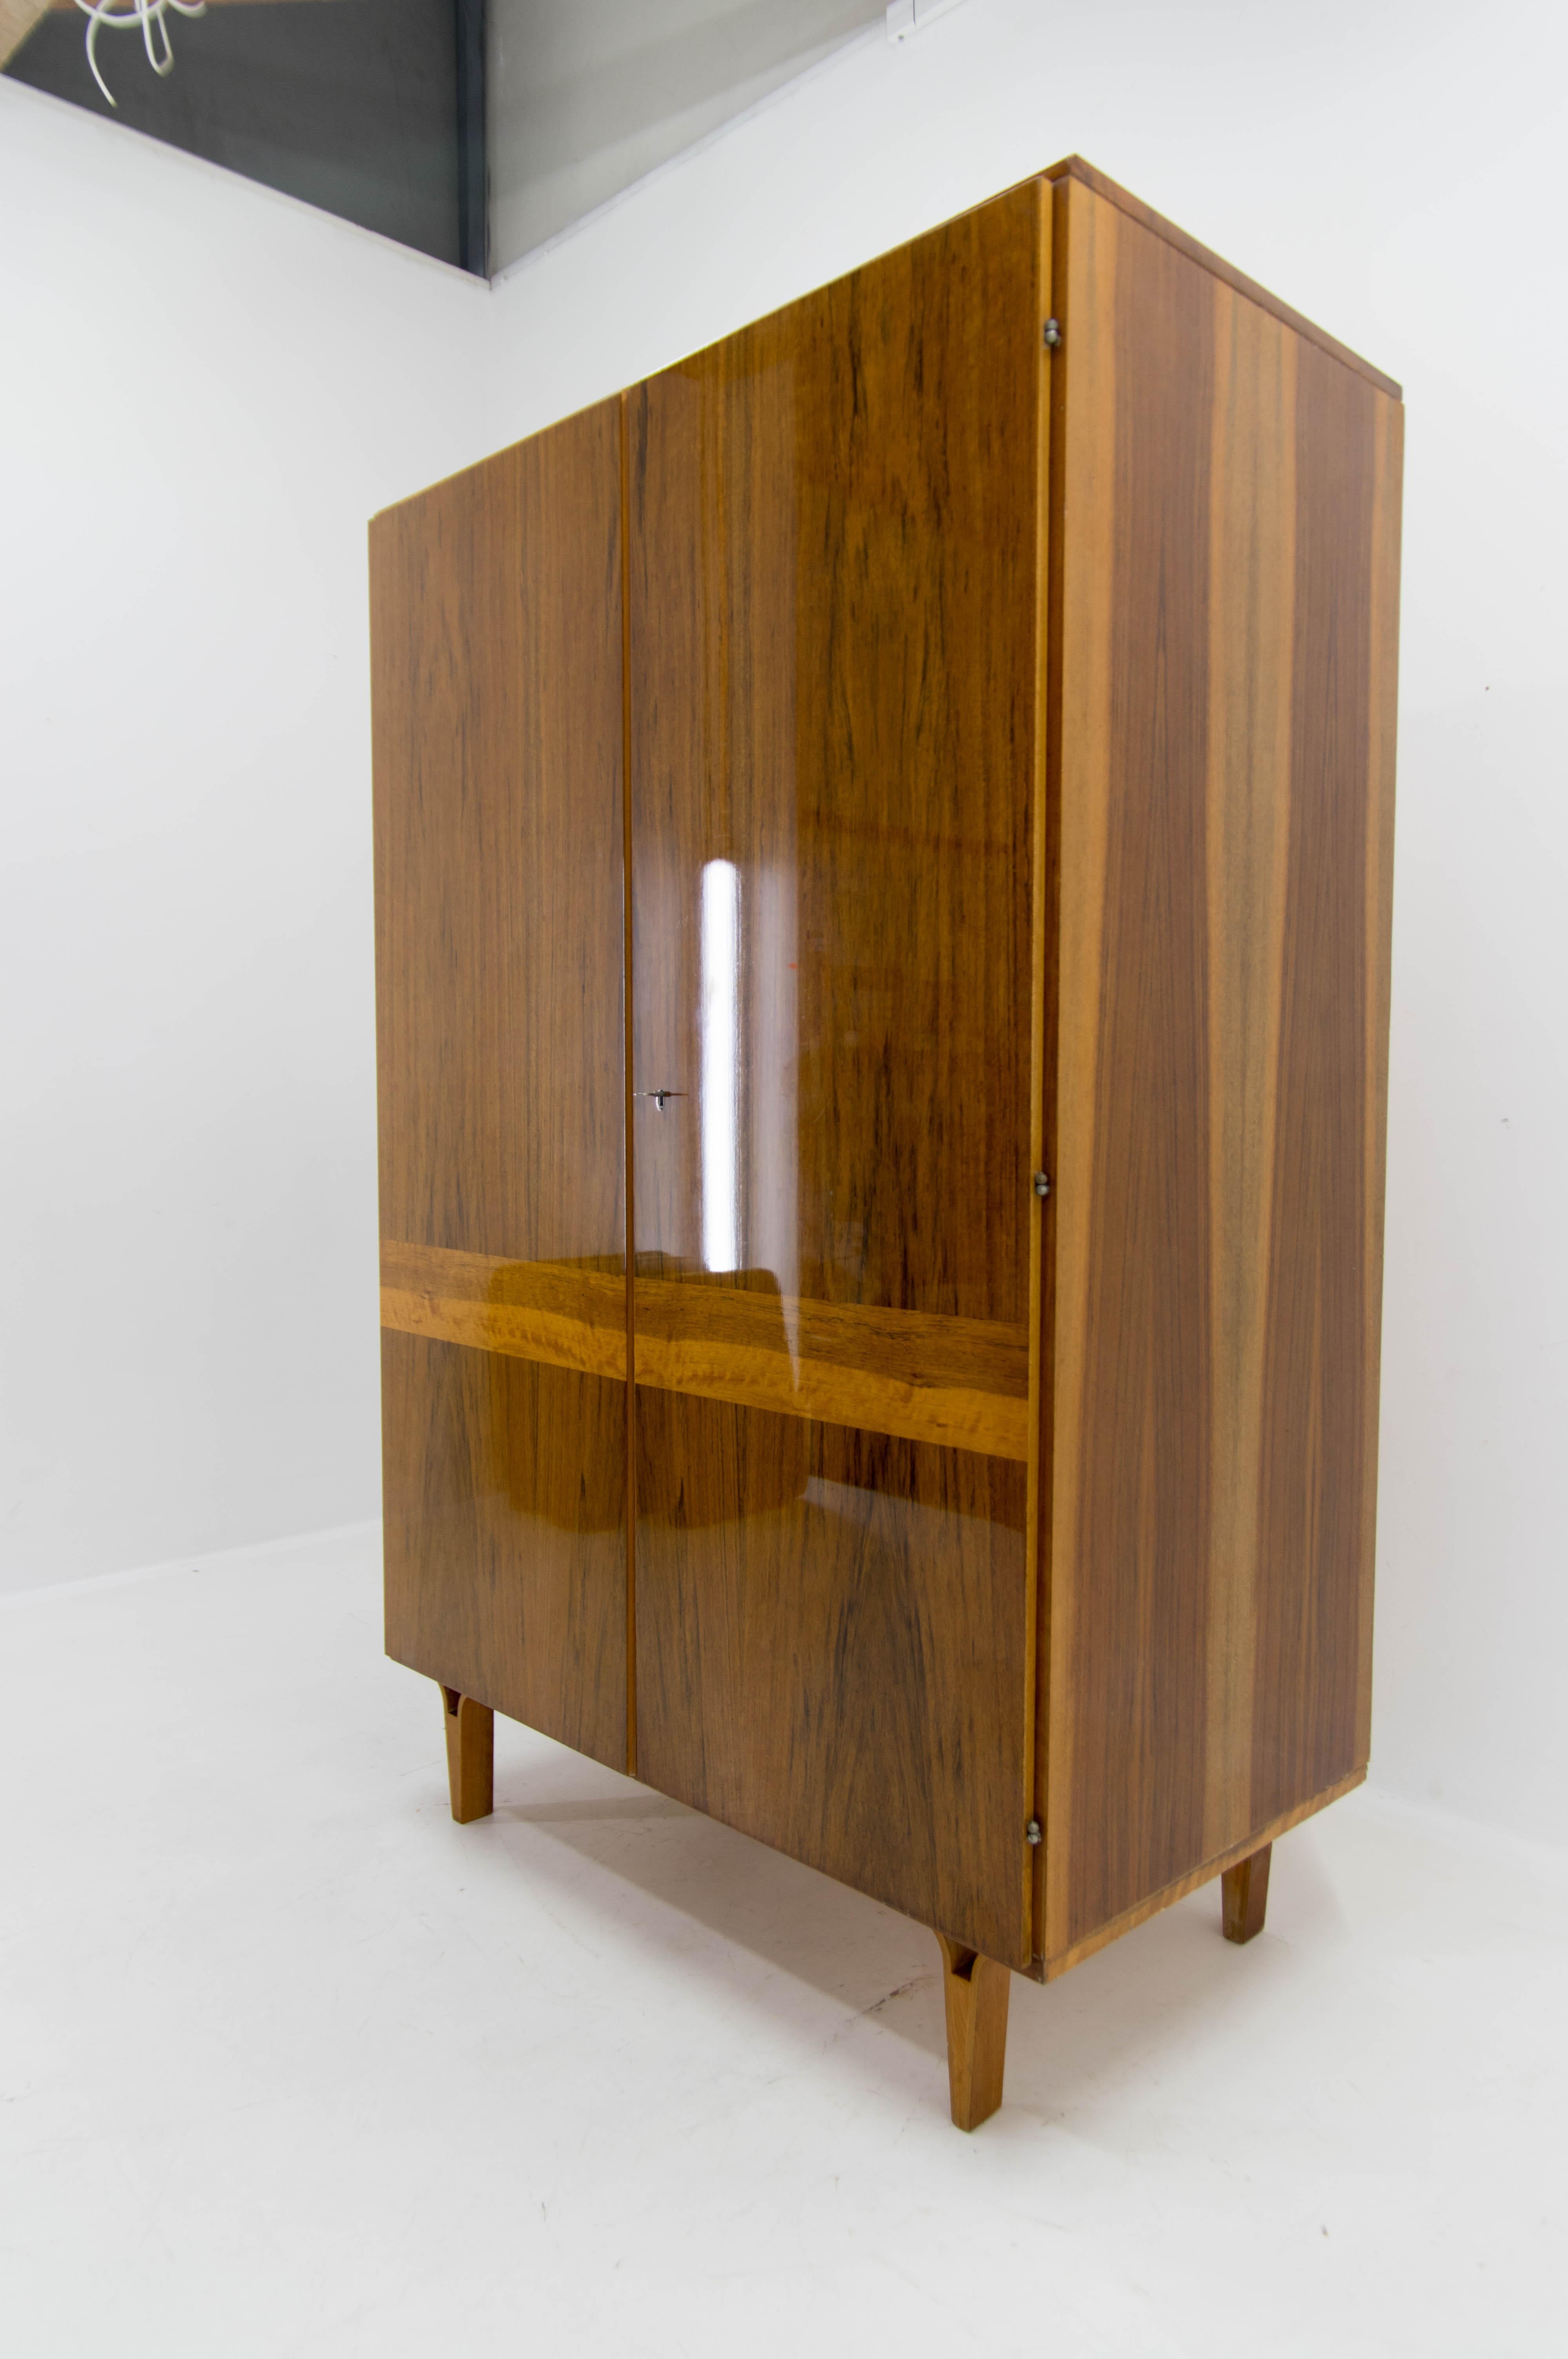 Design Mid-century wardrobe with shelf and two drawers designed by Frantisek Mezulanik and executed and labeled by Novy Domov in Czechoslovakia in 1974.
Elegant design legs made of plywood.
Veneer with high gloss finish in perfect condition.
Cleaned